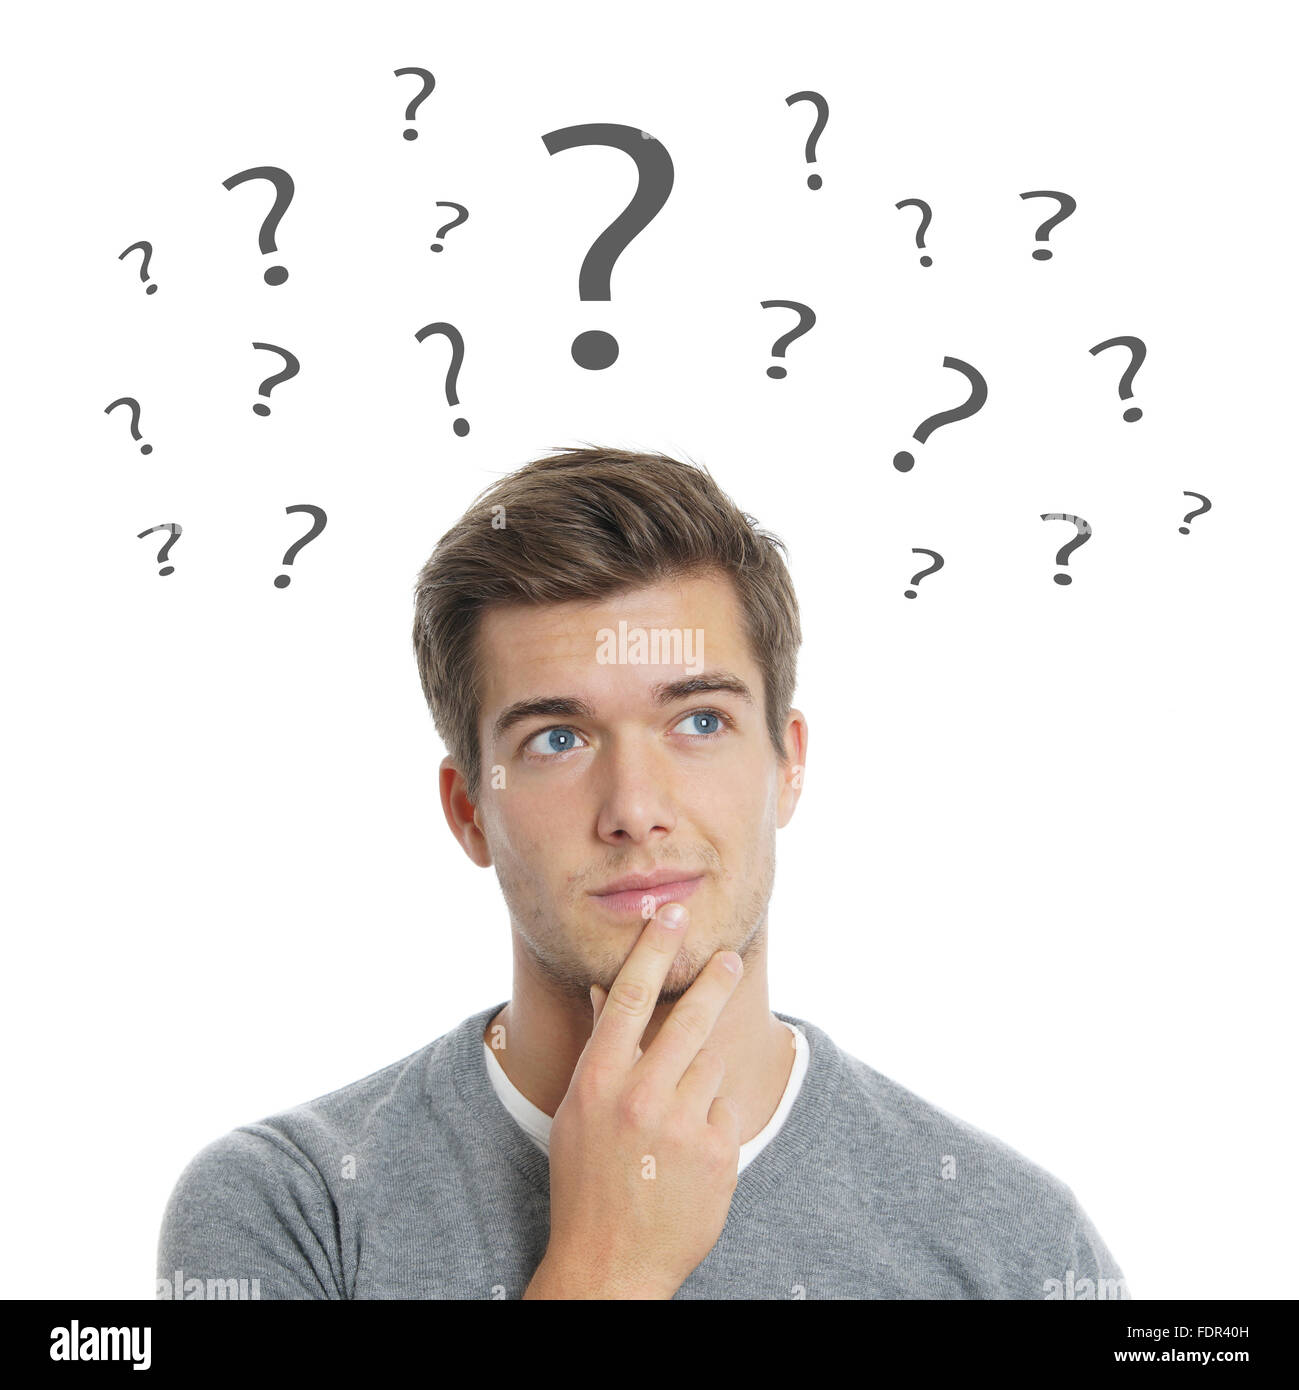 Young Manthinkingquestion Markquestioning Stock Photo 94550417 Alamy